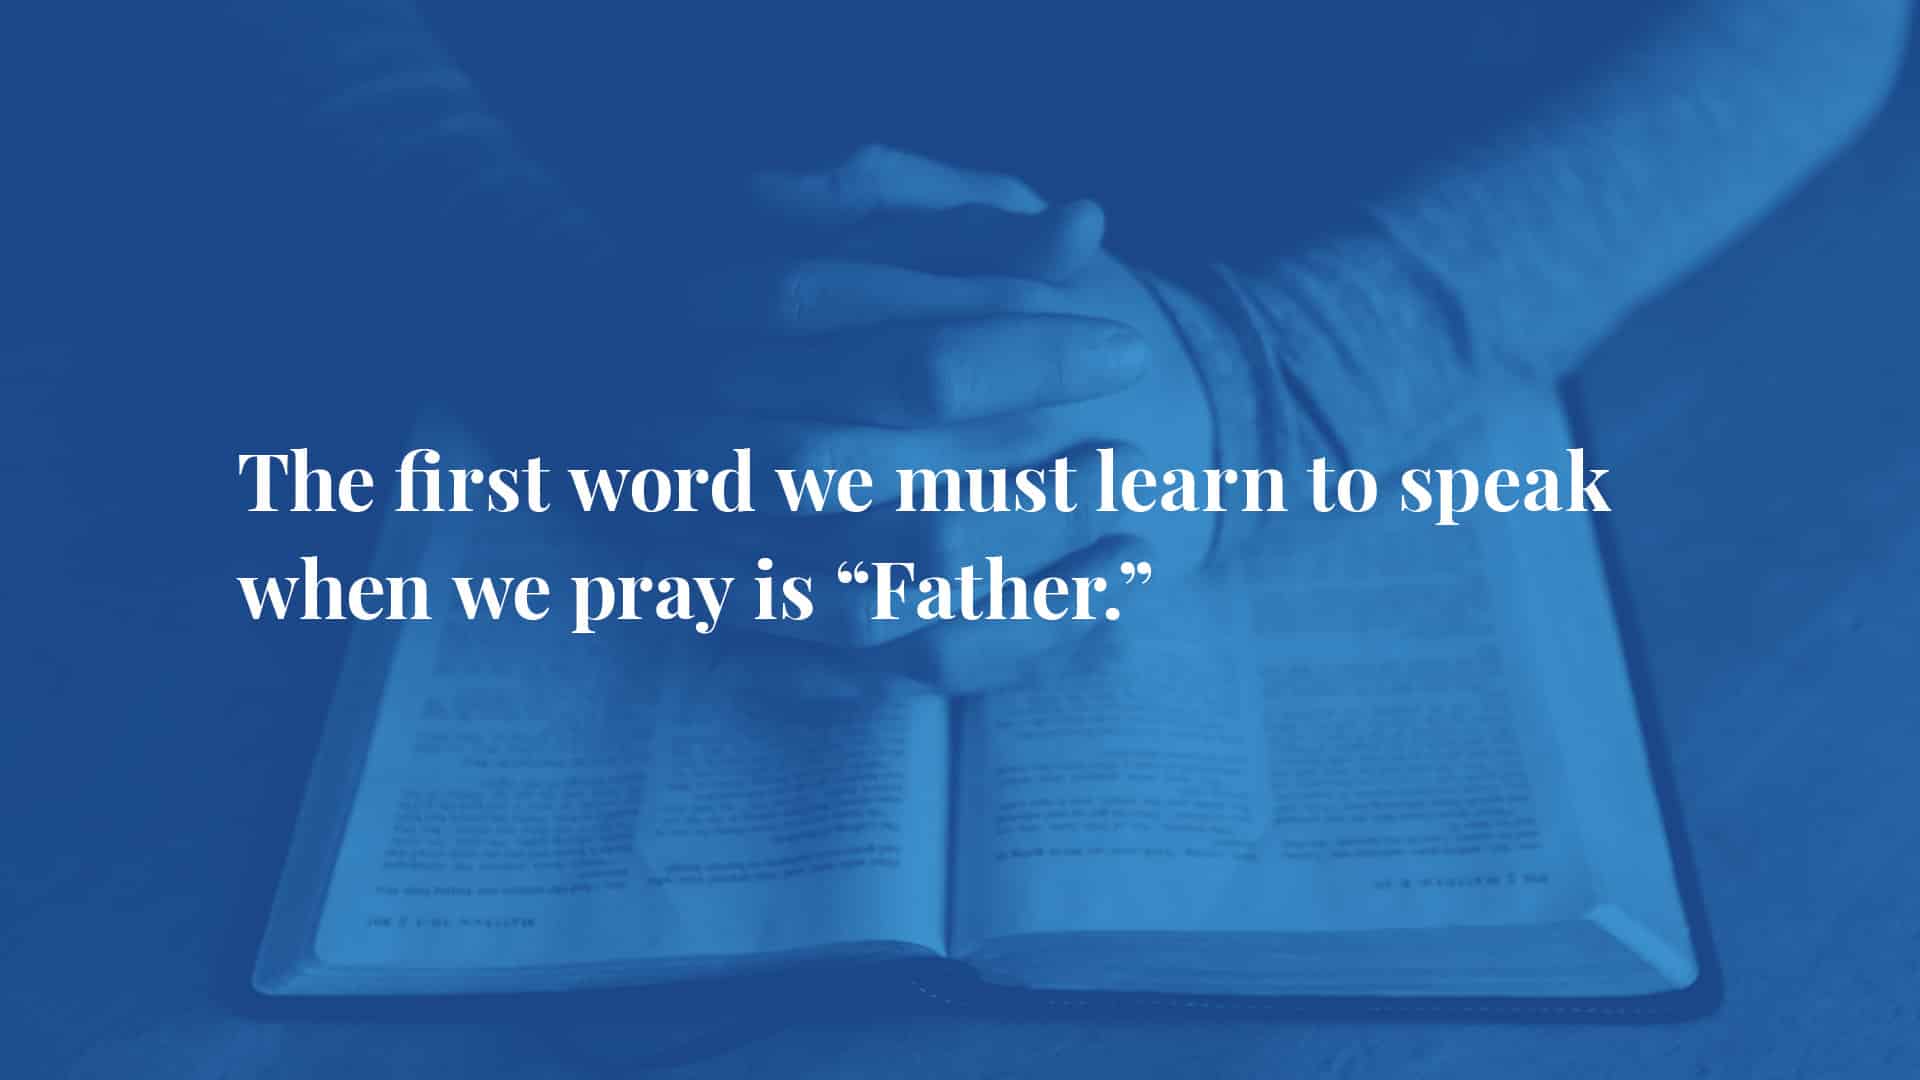 The first word we must learn to speak when we pray is "Father."